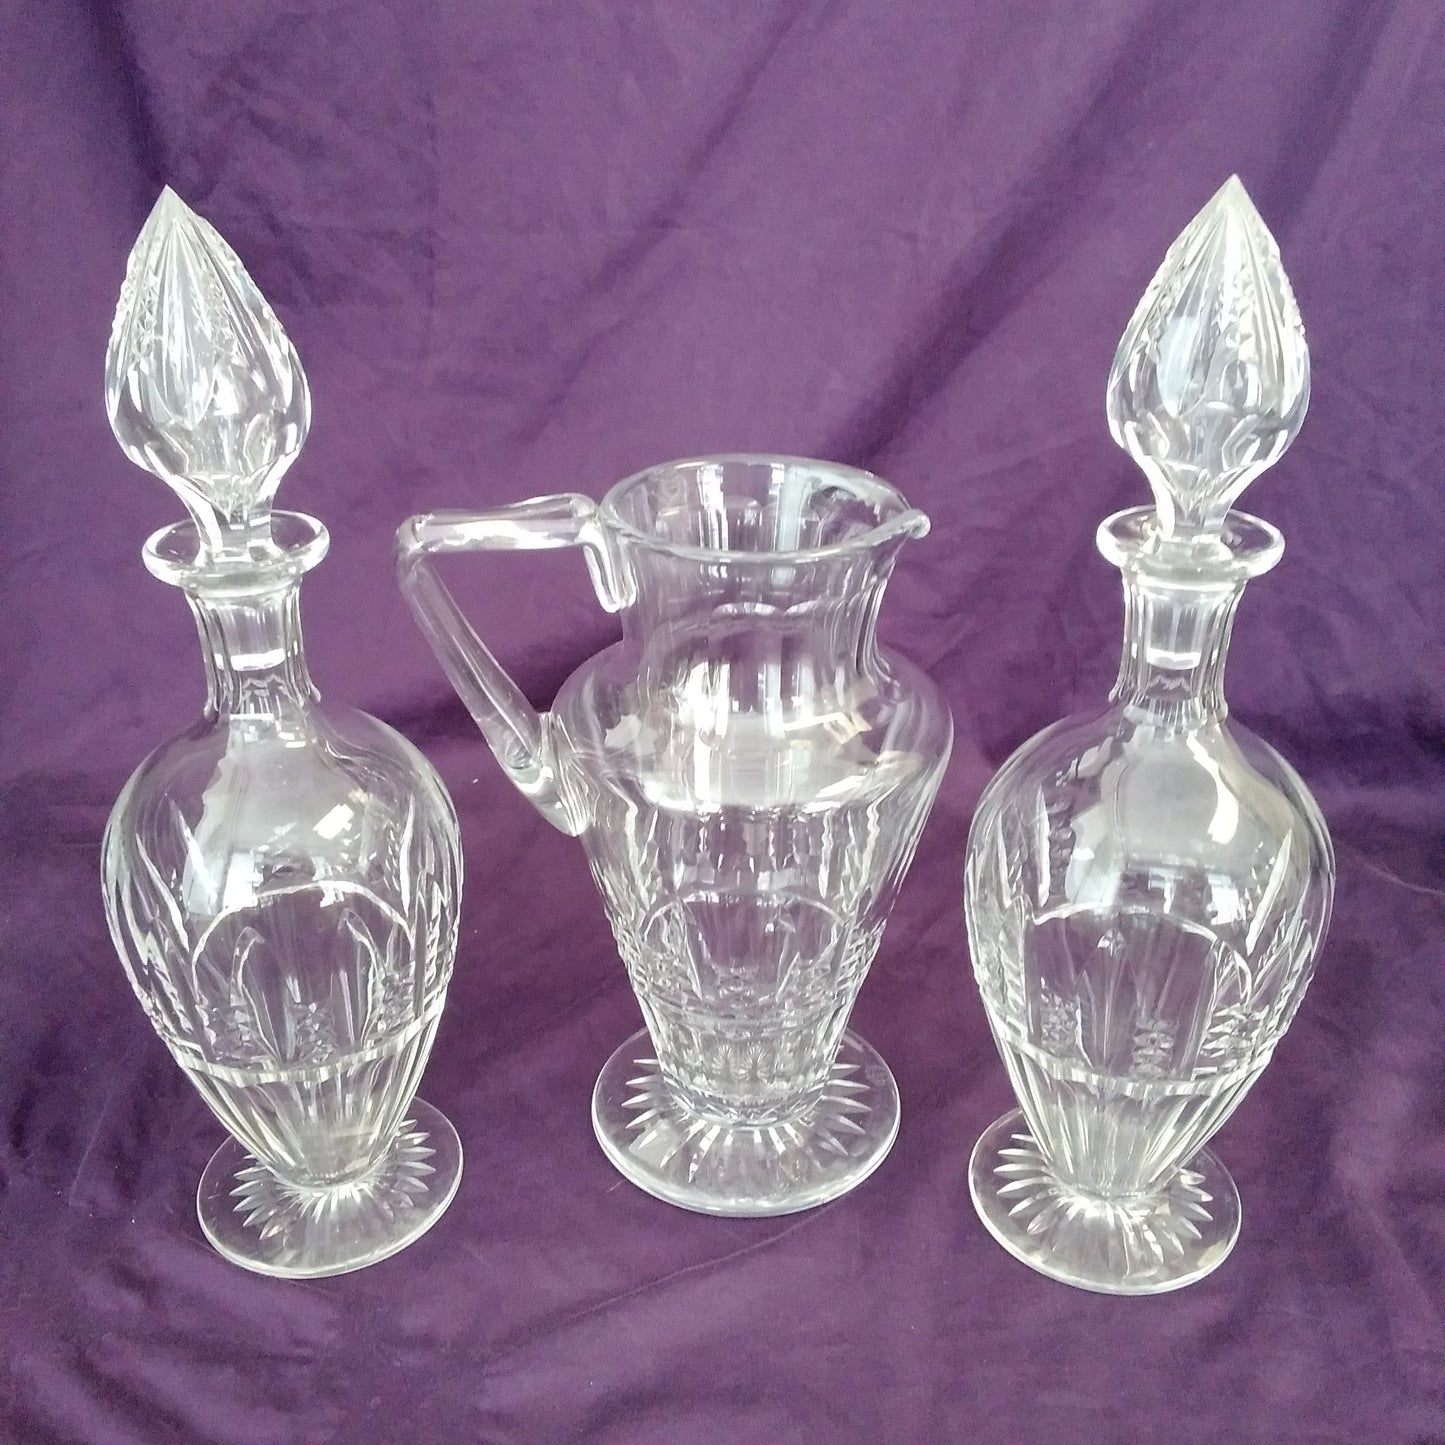 VTG - BACCARAT AUSTERLITZ - Pitcher and 2 Decanters with Stoppers Set